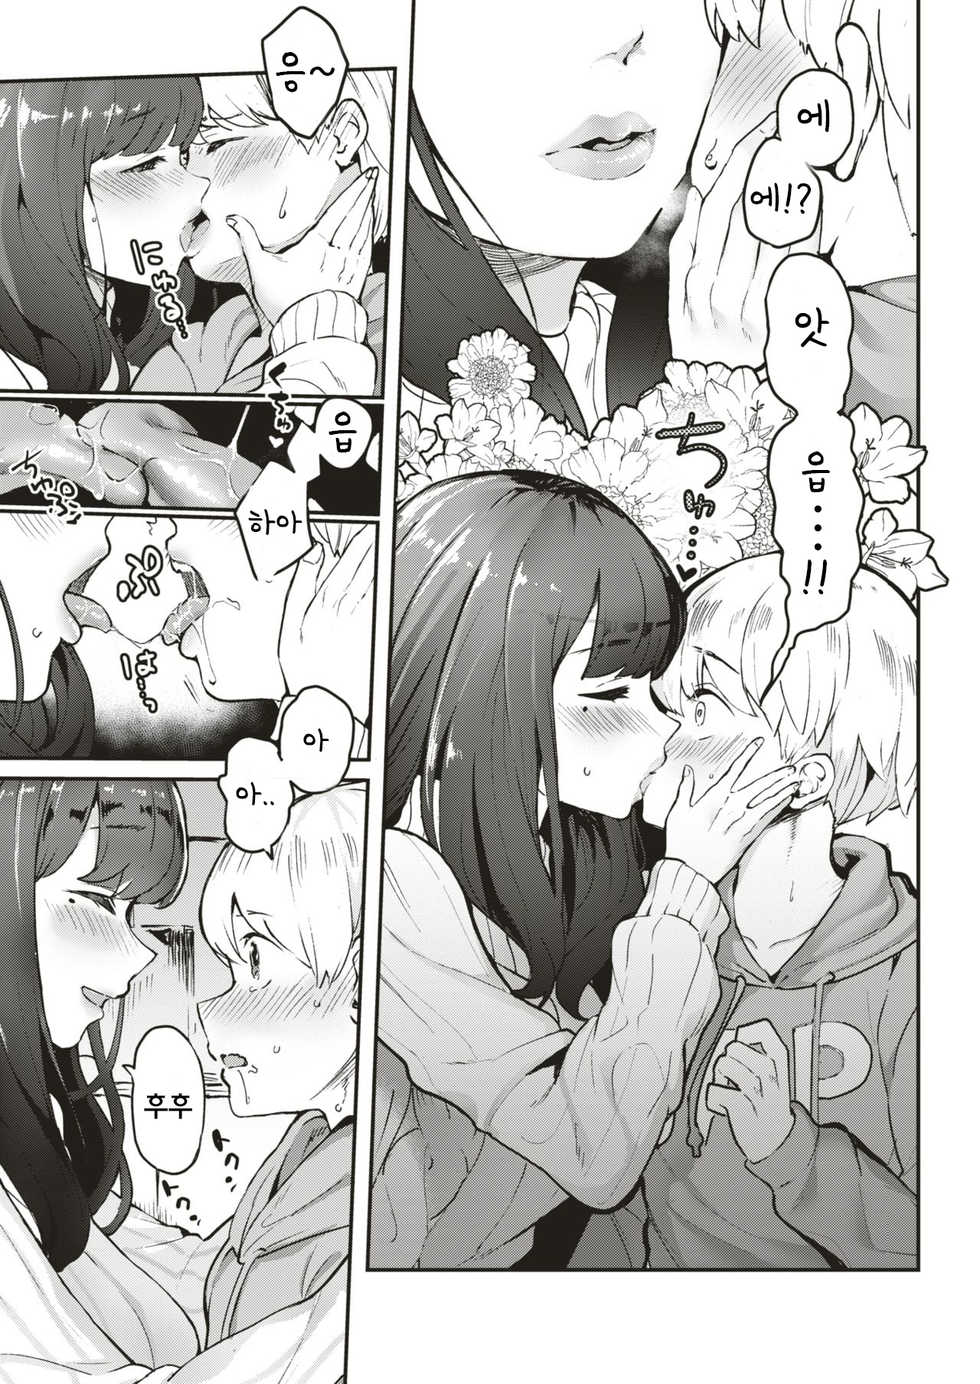 [ababari] Tomodachi no Onee-san - Your sister is fucking special | 친구의 누나 (COMIC X-EROS #79) [Korean] [Digital] - Page 5